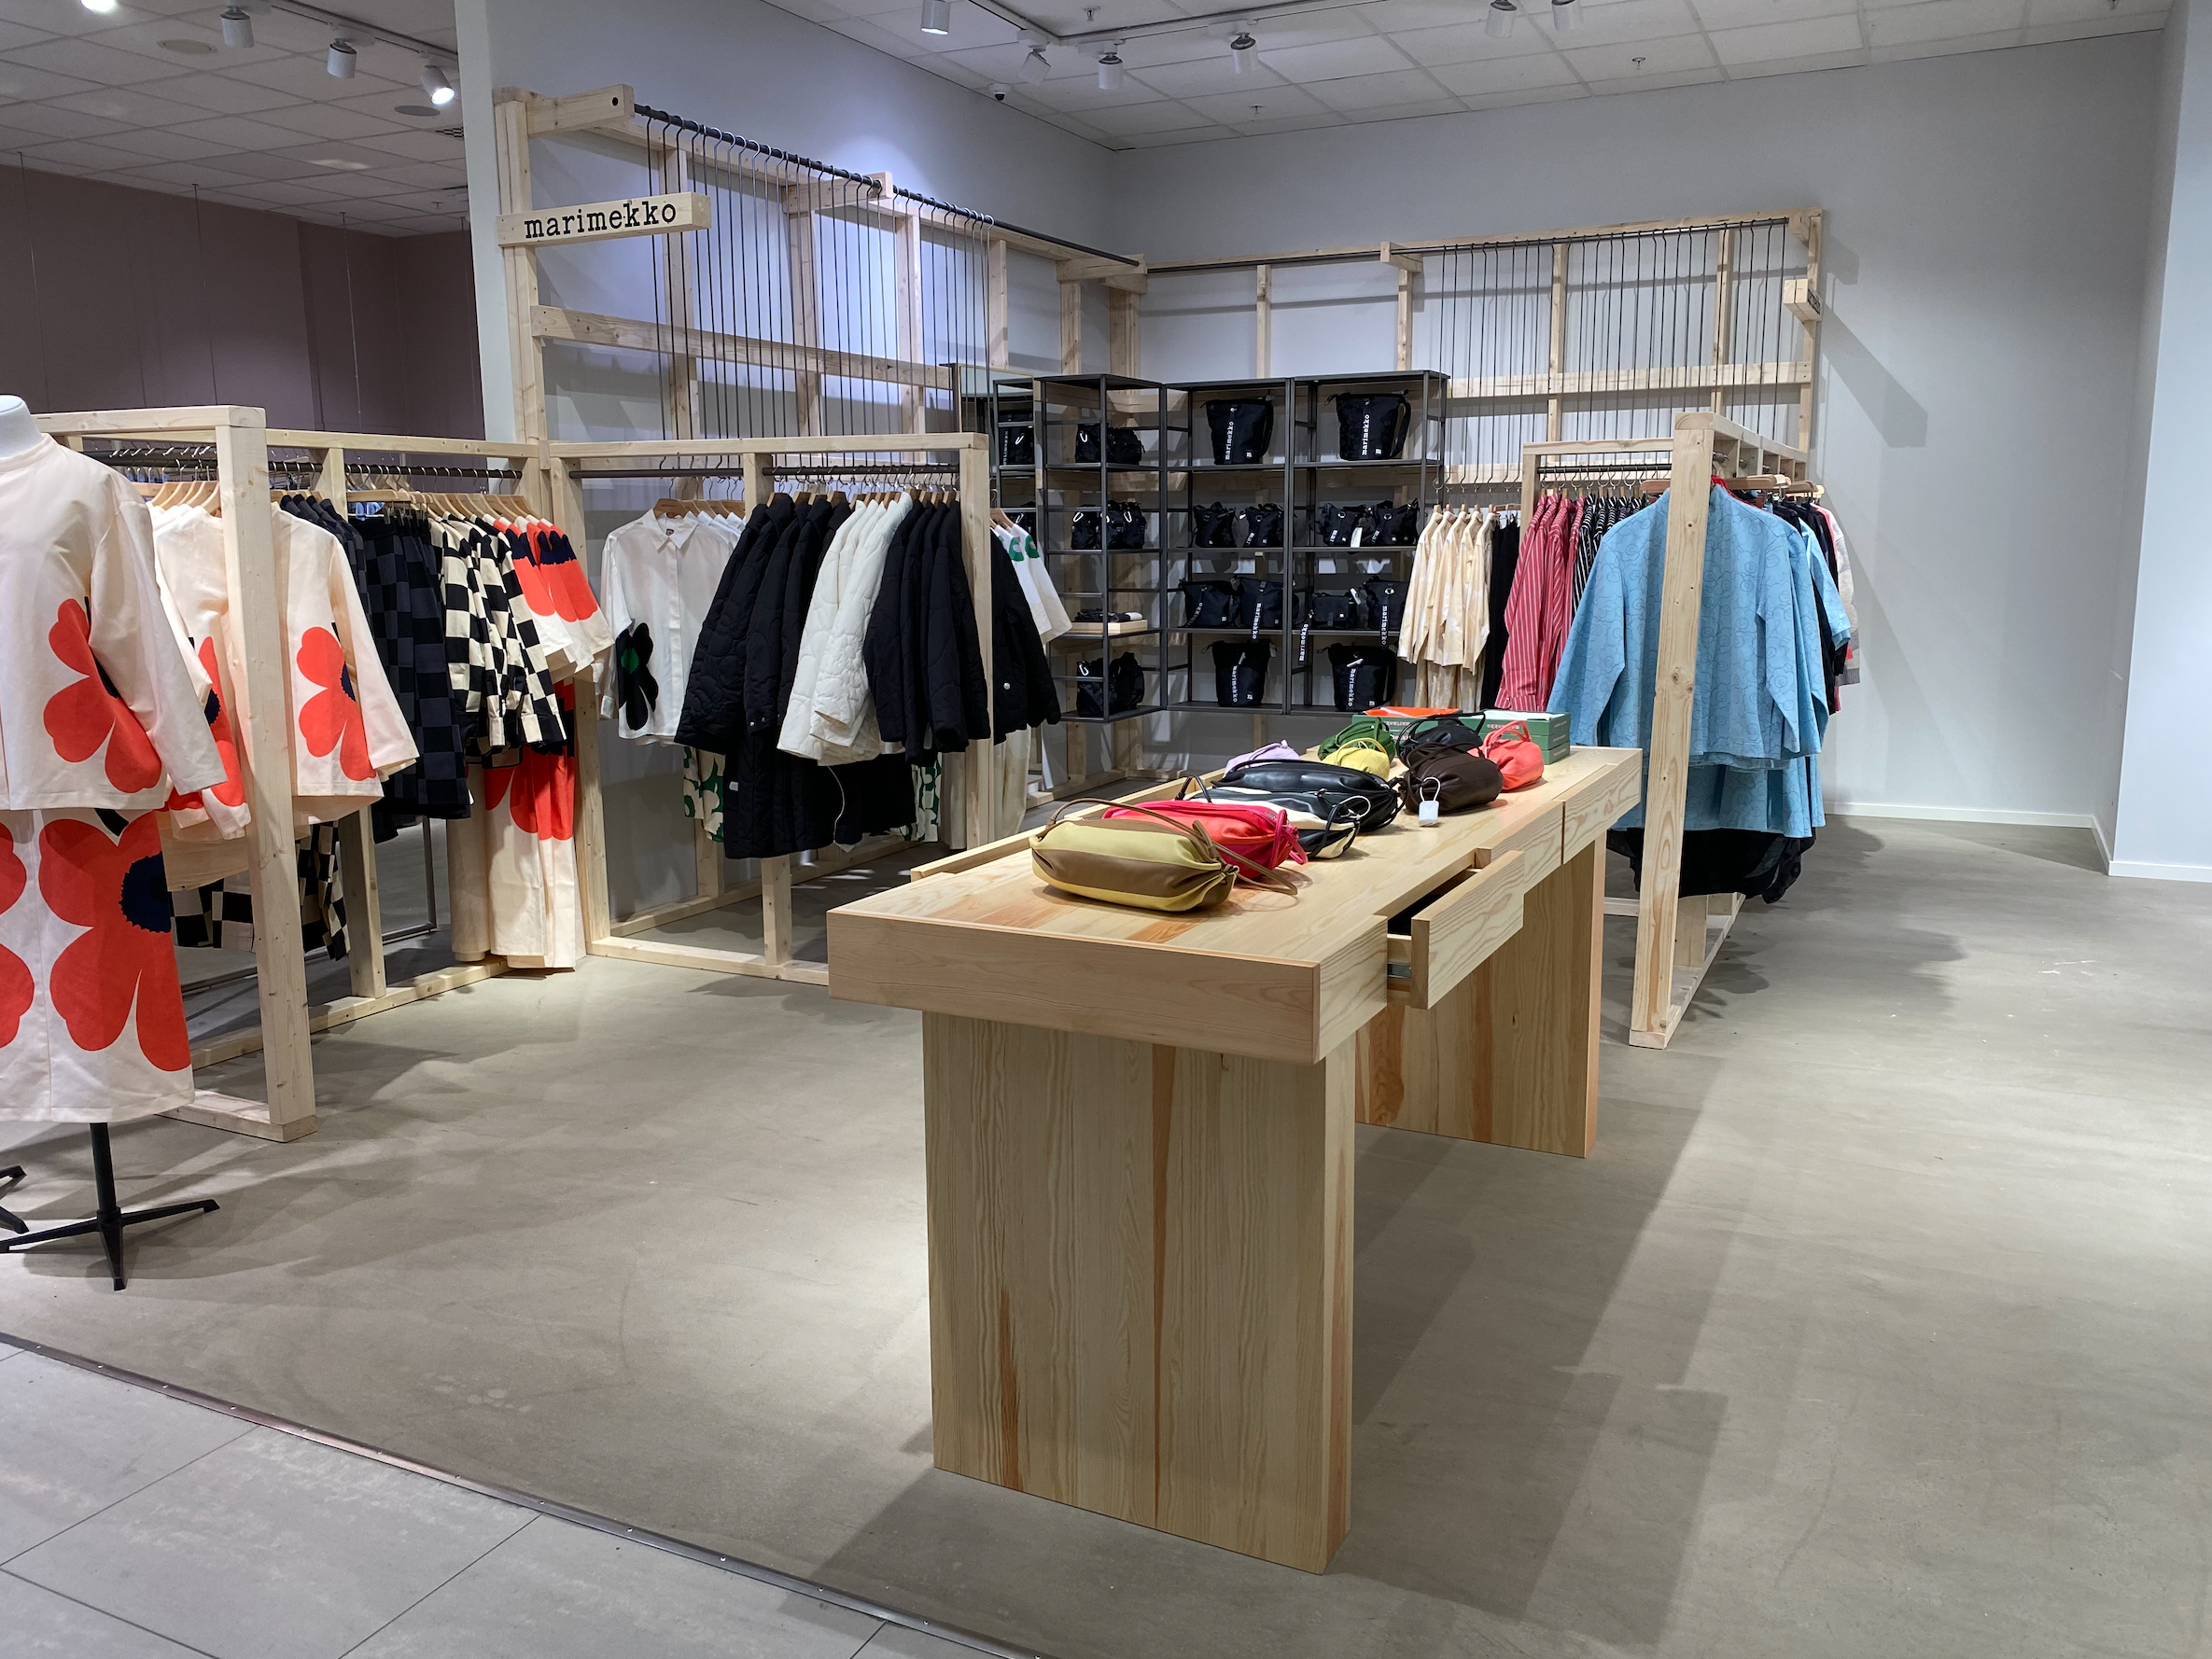 Shop-in-shop paves the way for future retail